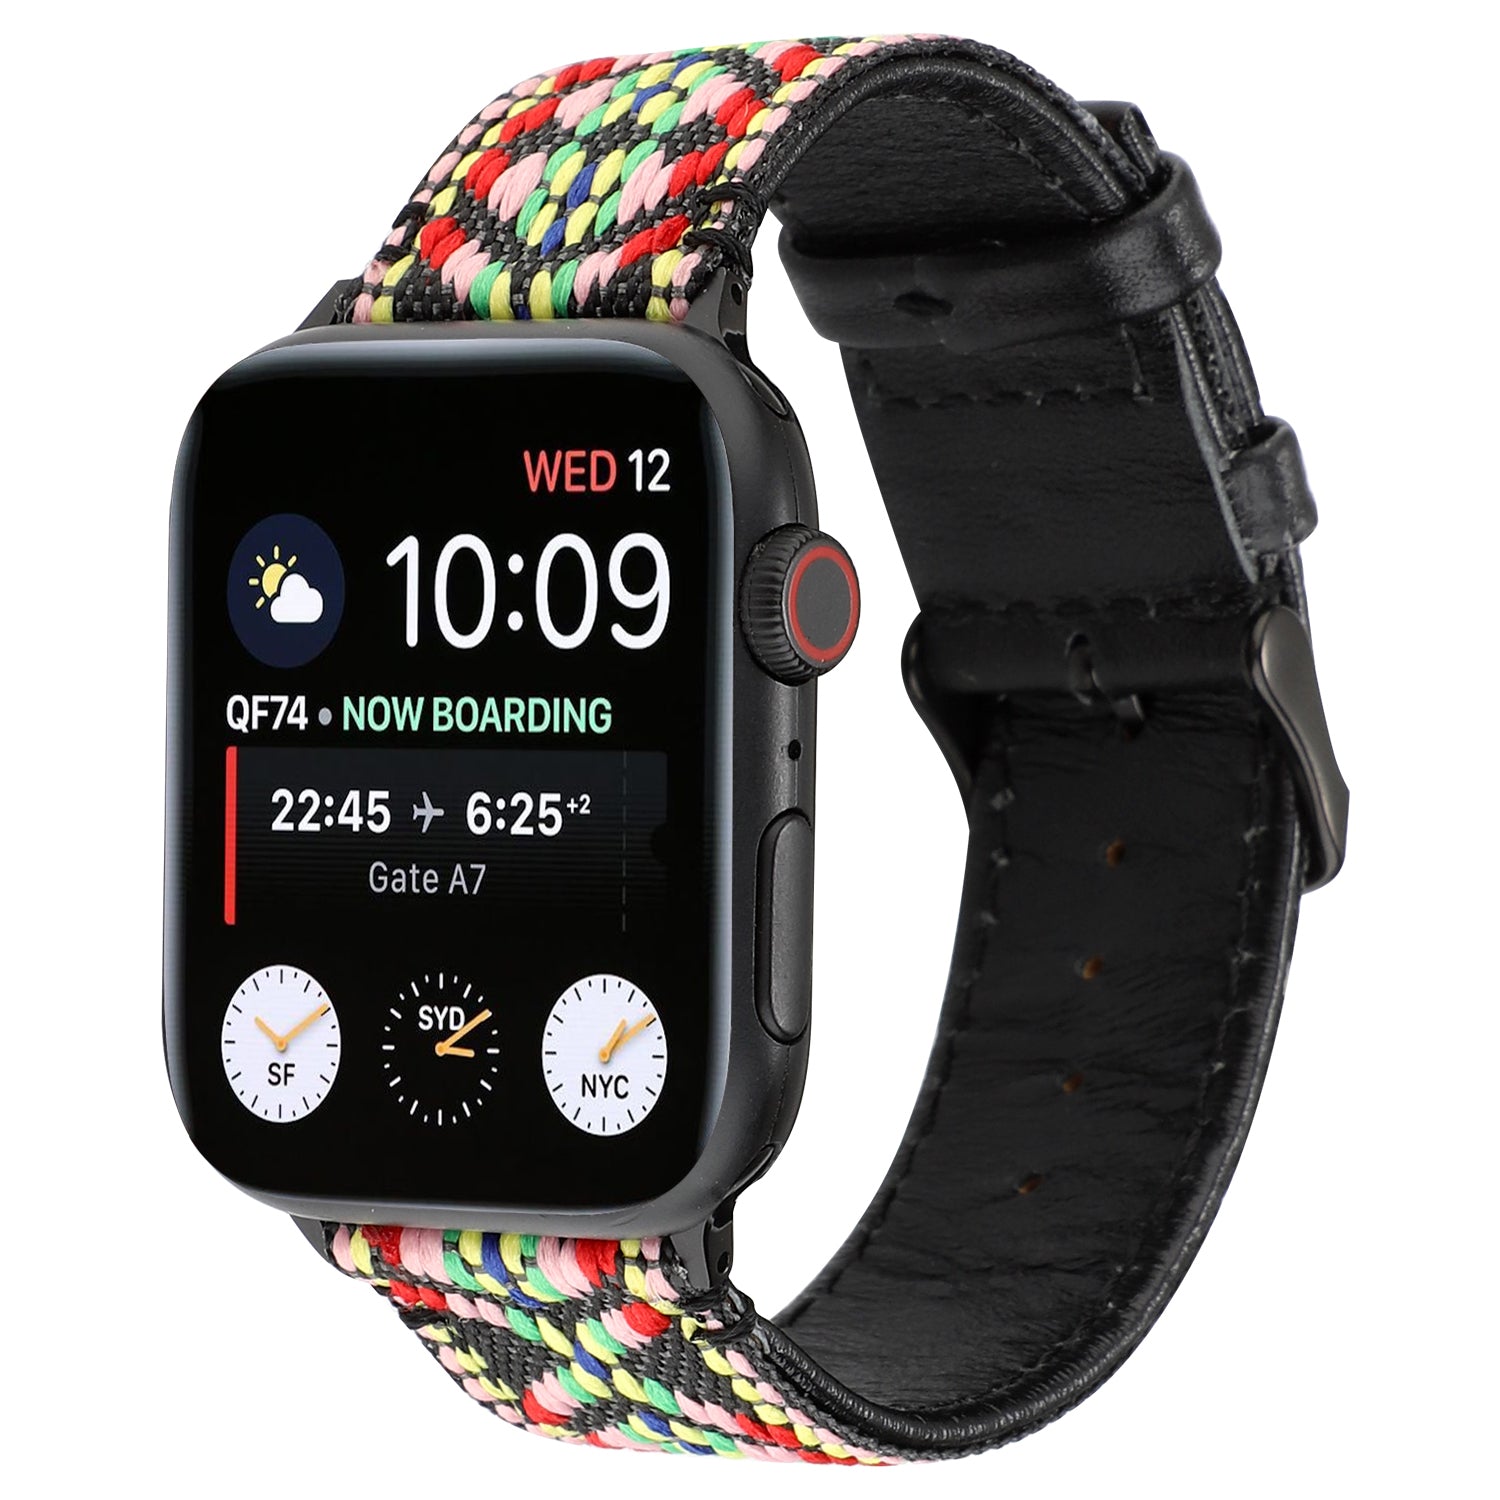 Boho-DreamWeave Leather Band For Apple Watch Multiple Colors Available